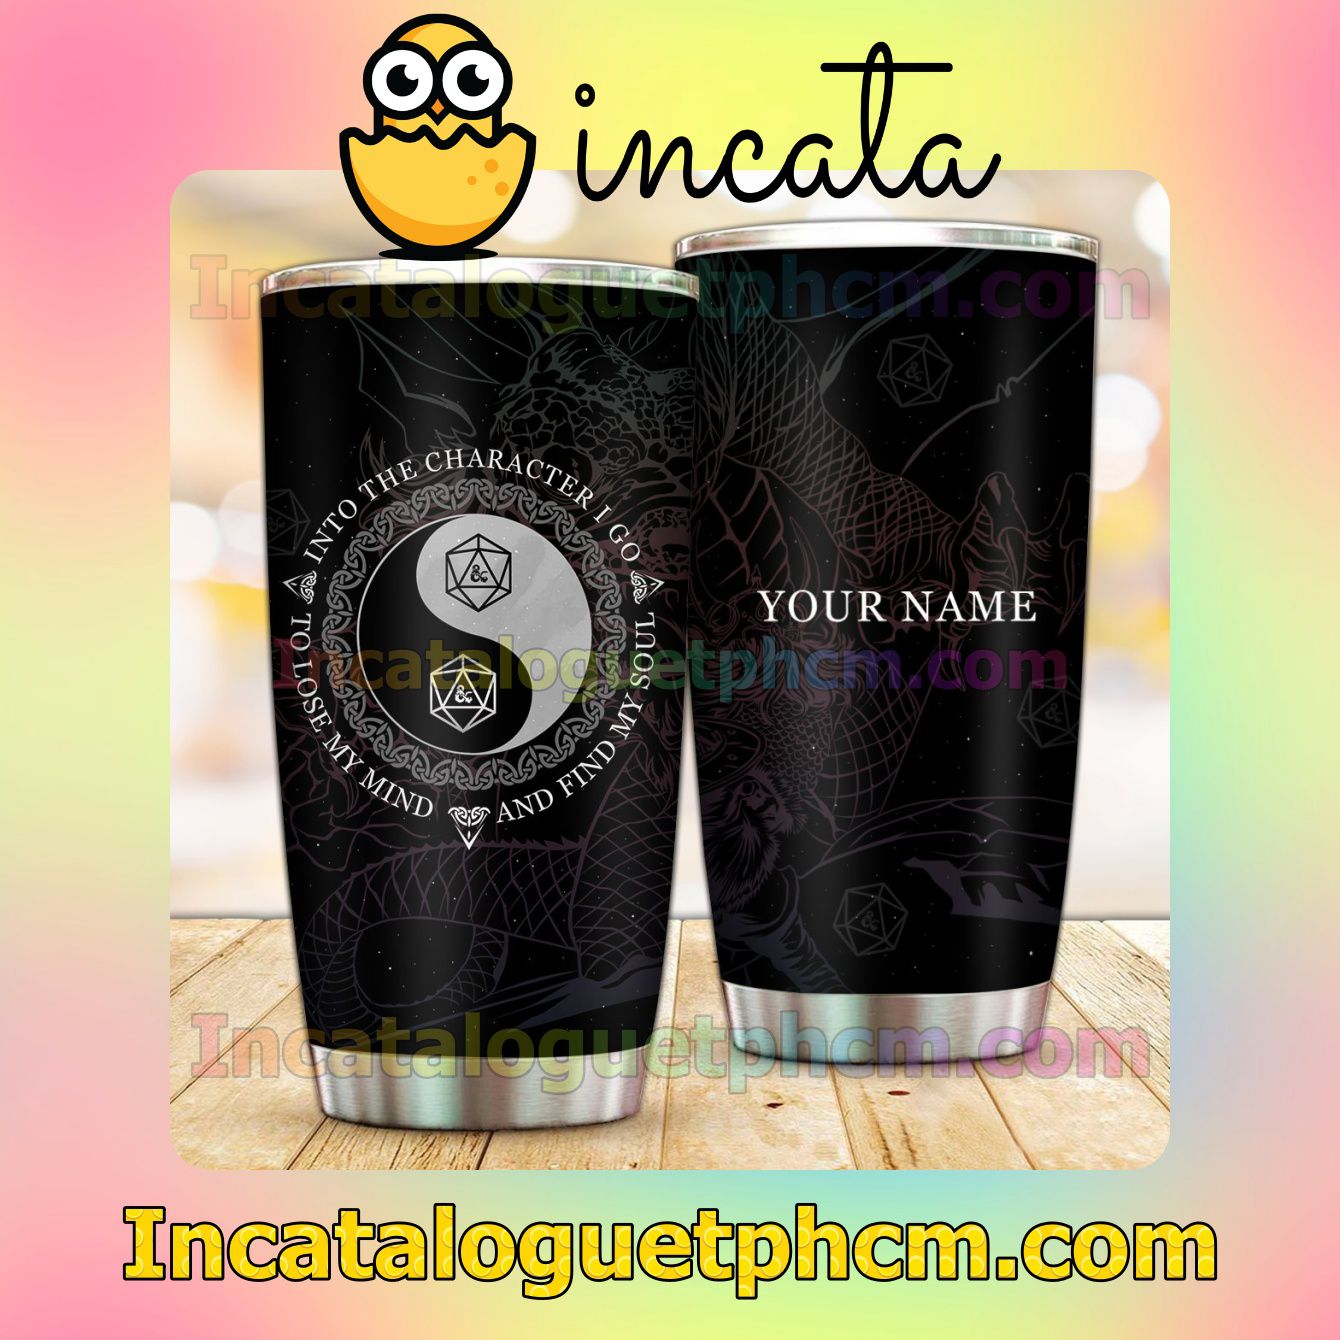 Sale Off Personalized Dungeons Into The Character I Go To Lose My Mind And Find My Soul Tumbler Design Gift For Mom Sister